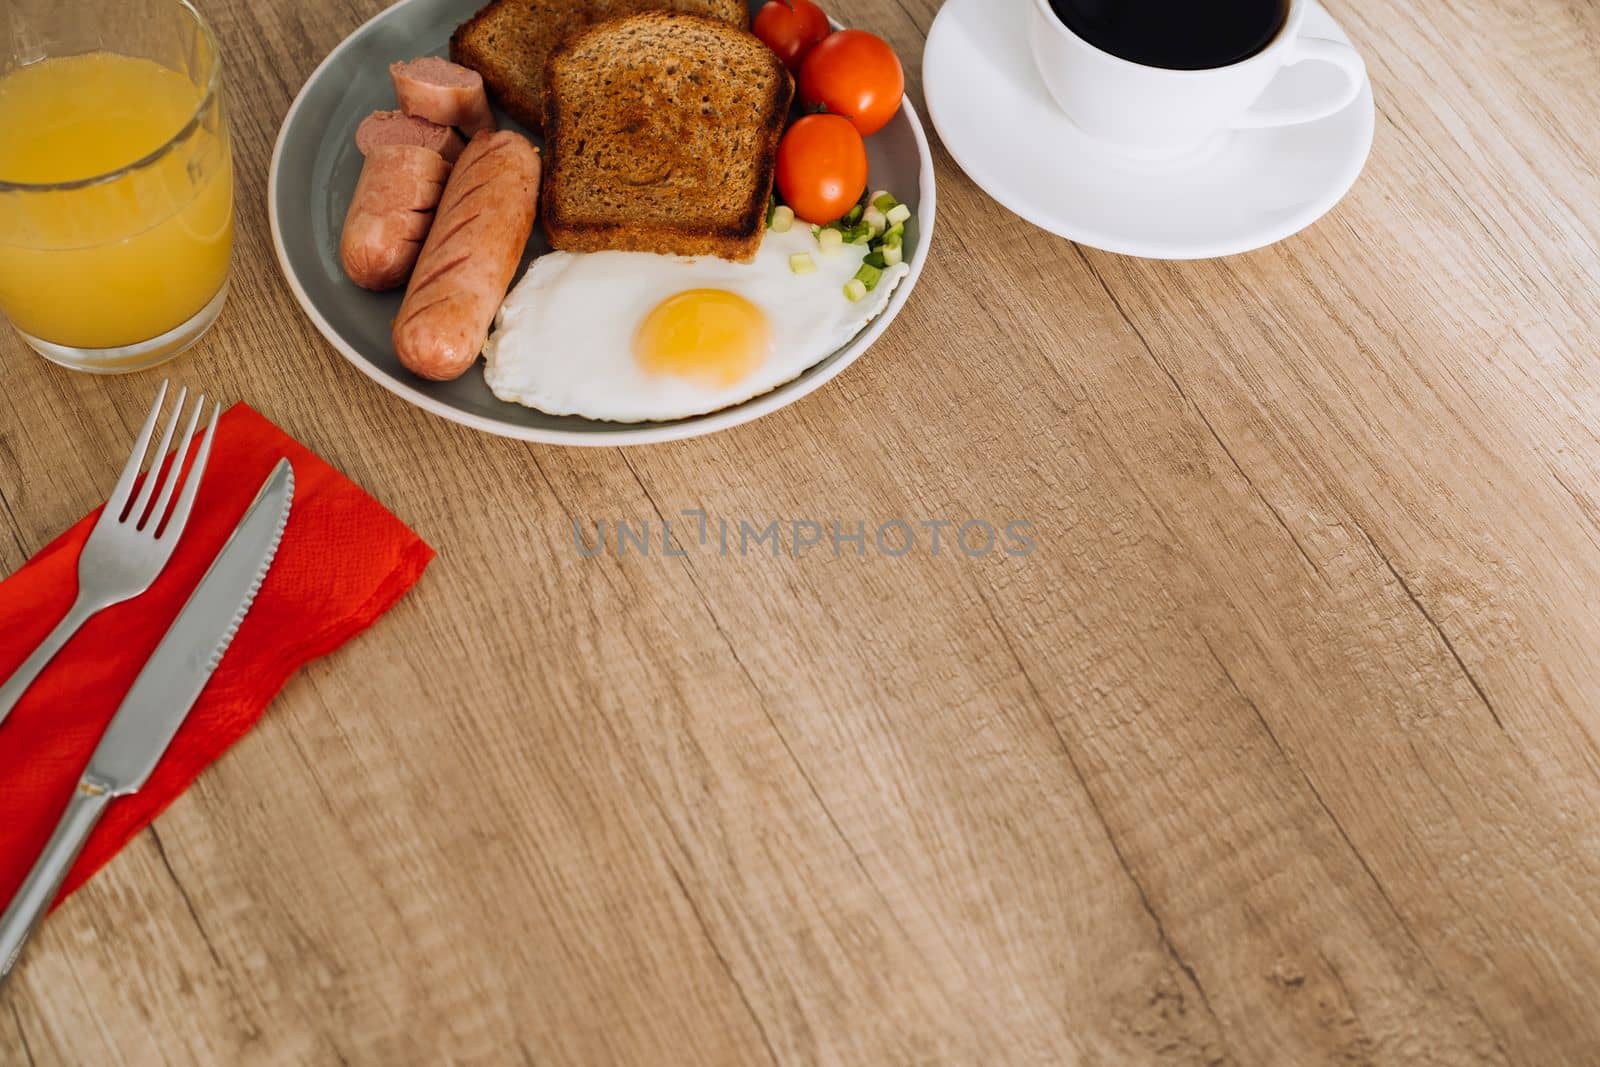 English breakfast with black coffee and orange juice on wooden table with copy space